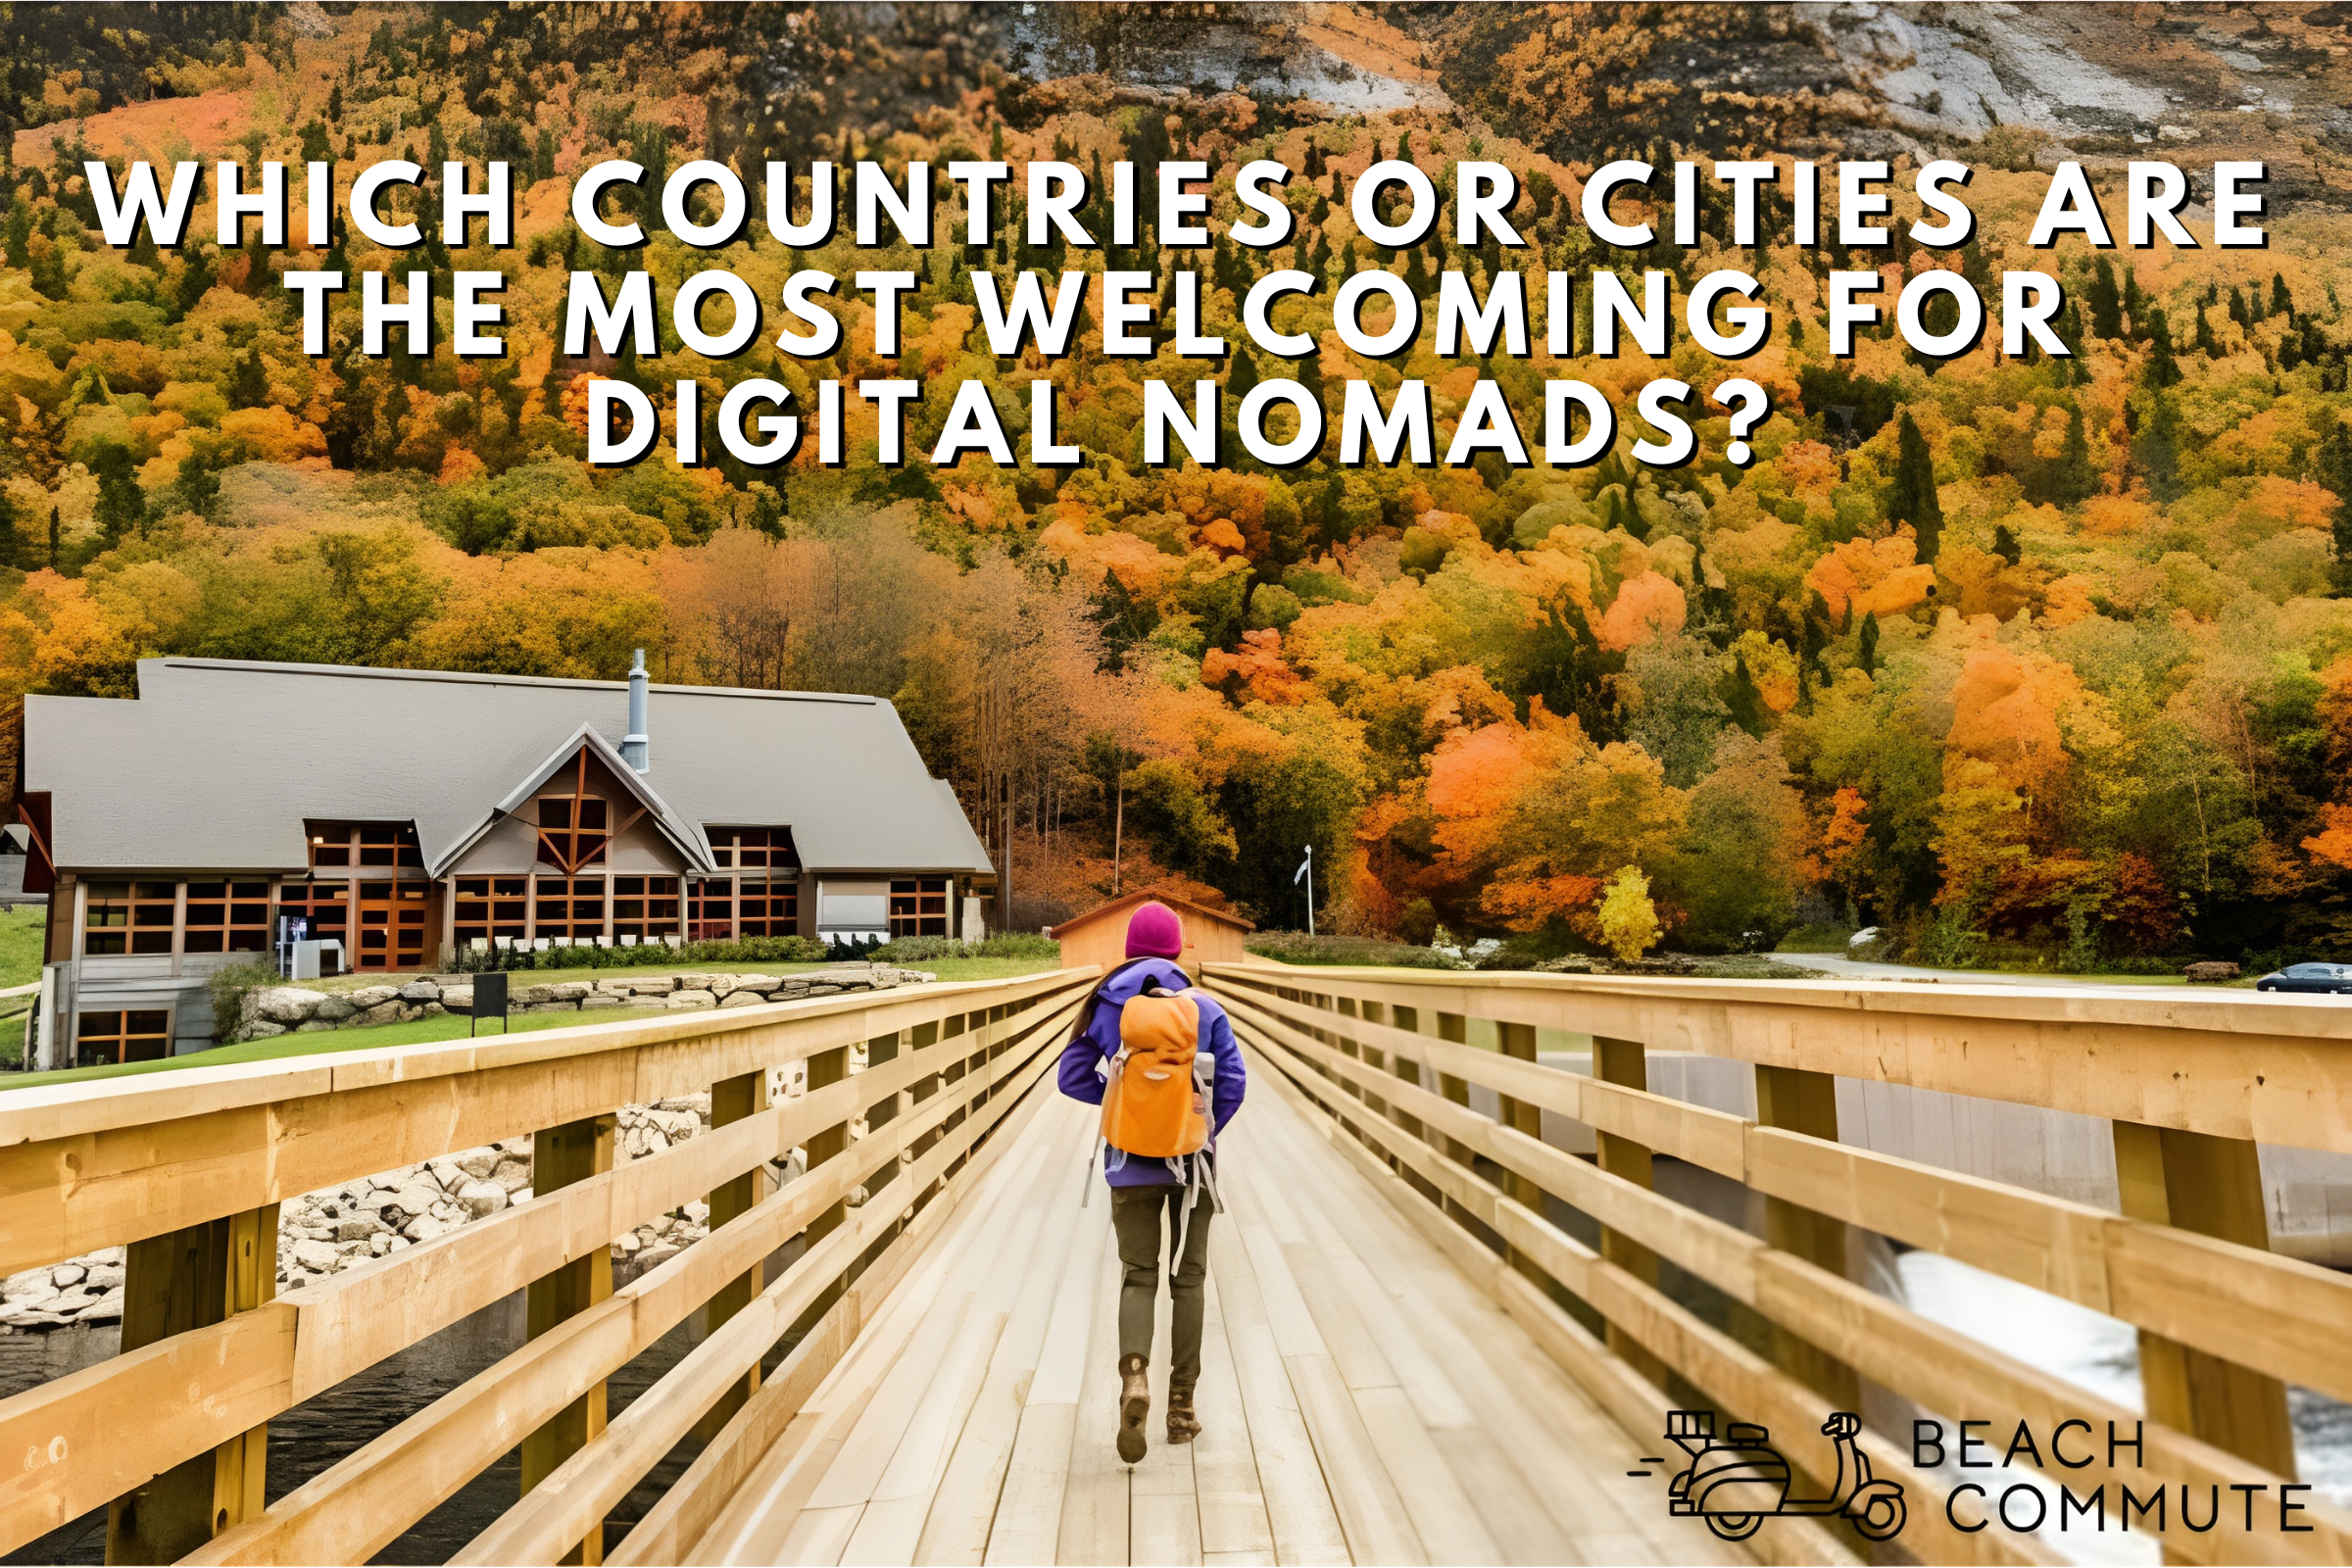 Which Countries or Cities are the Most Welcoming for Digital Nomads?